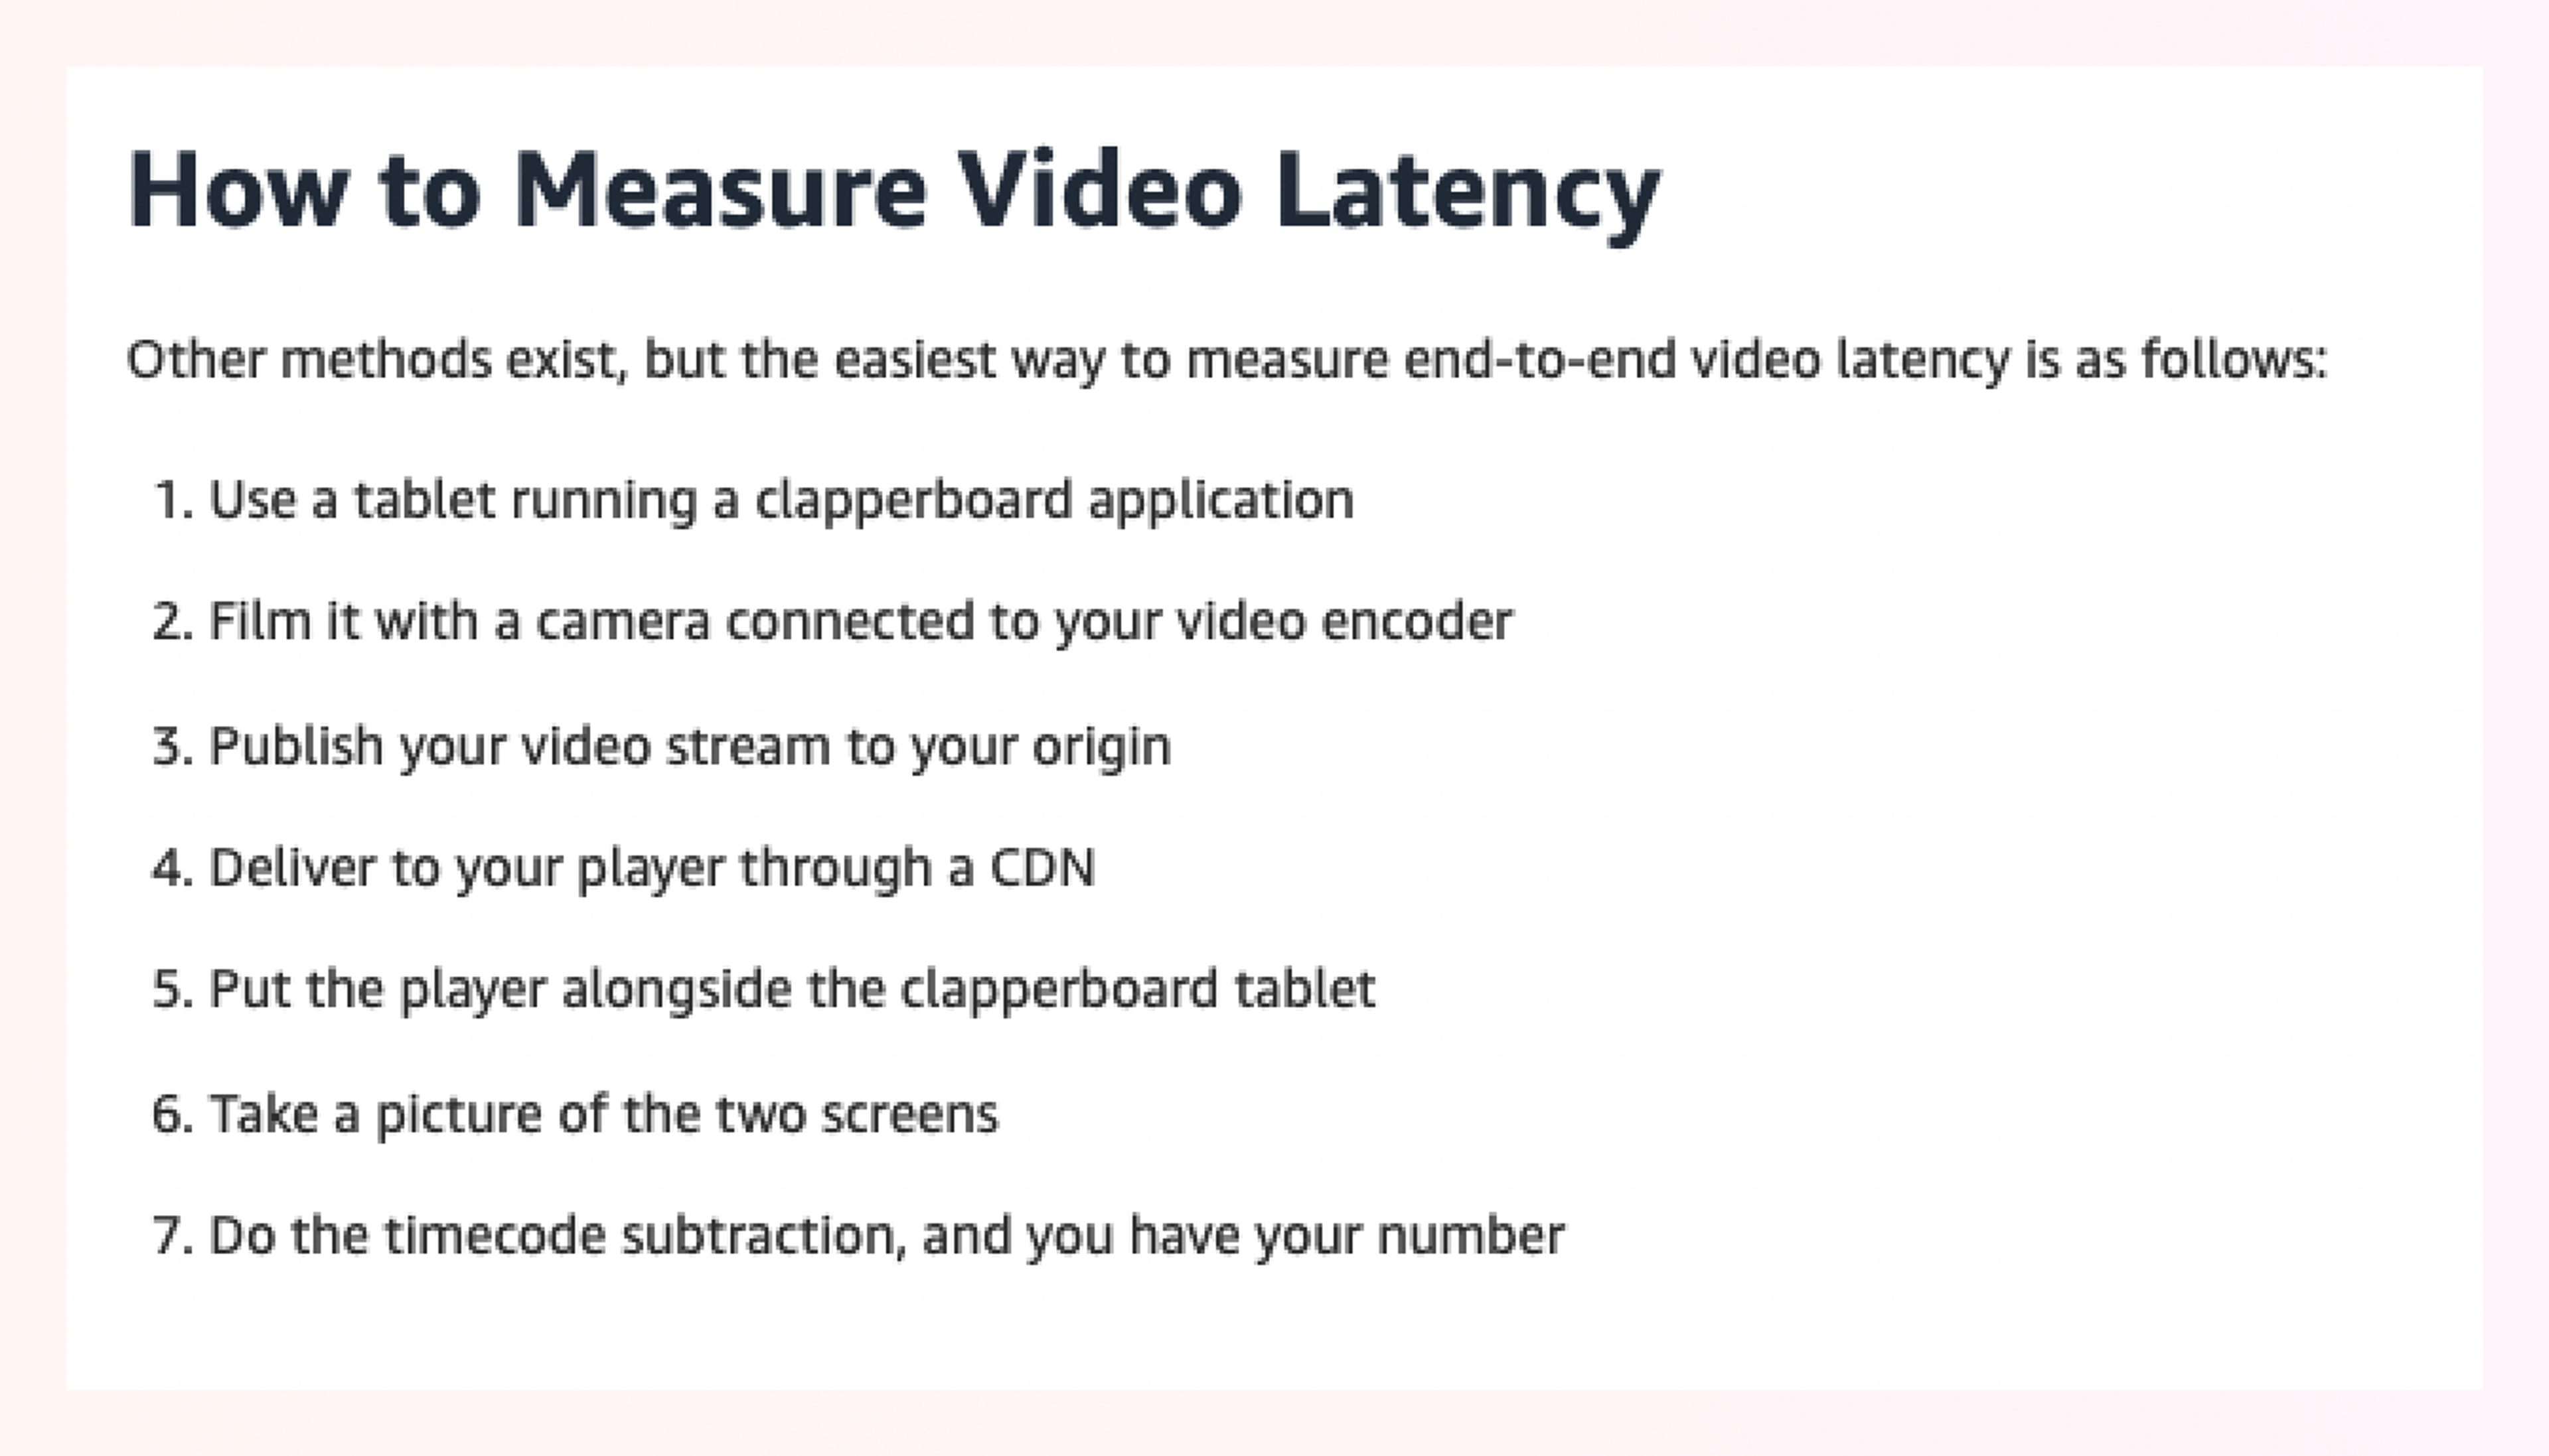 Image showing description of how to measure video latency using clapperboard application.